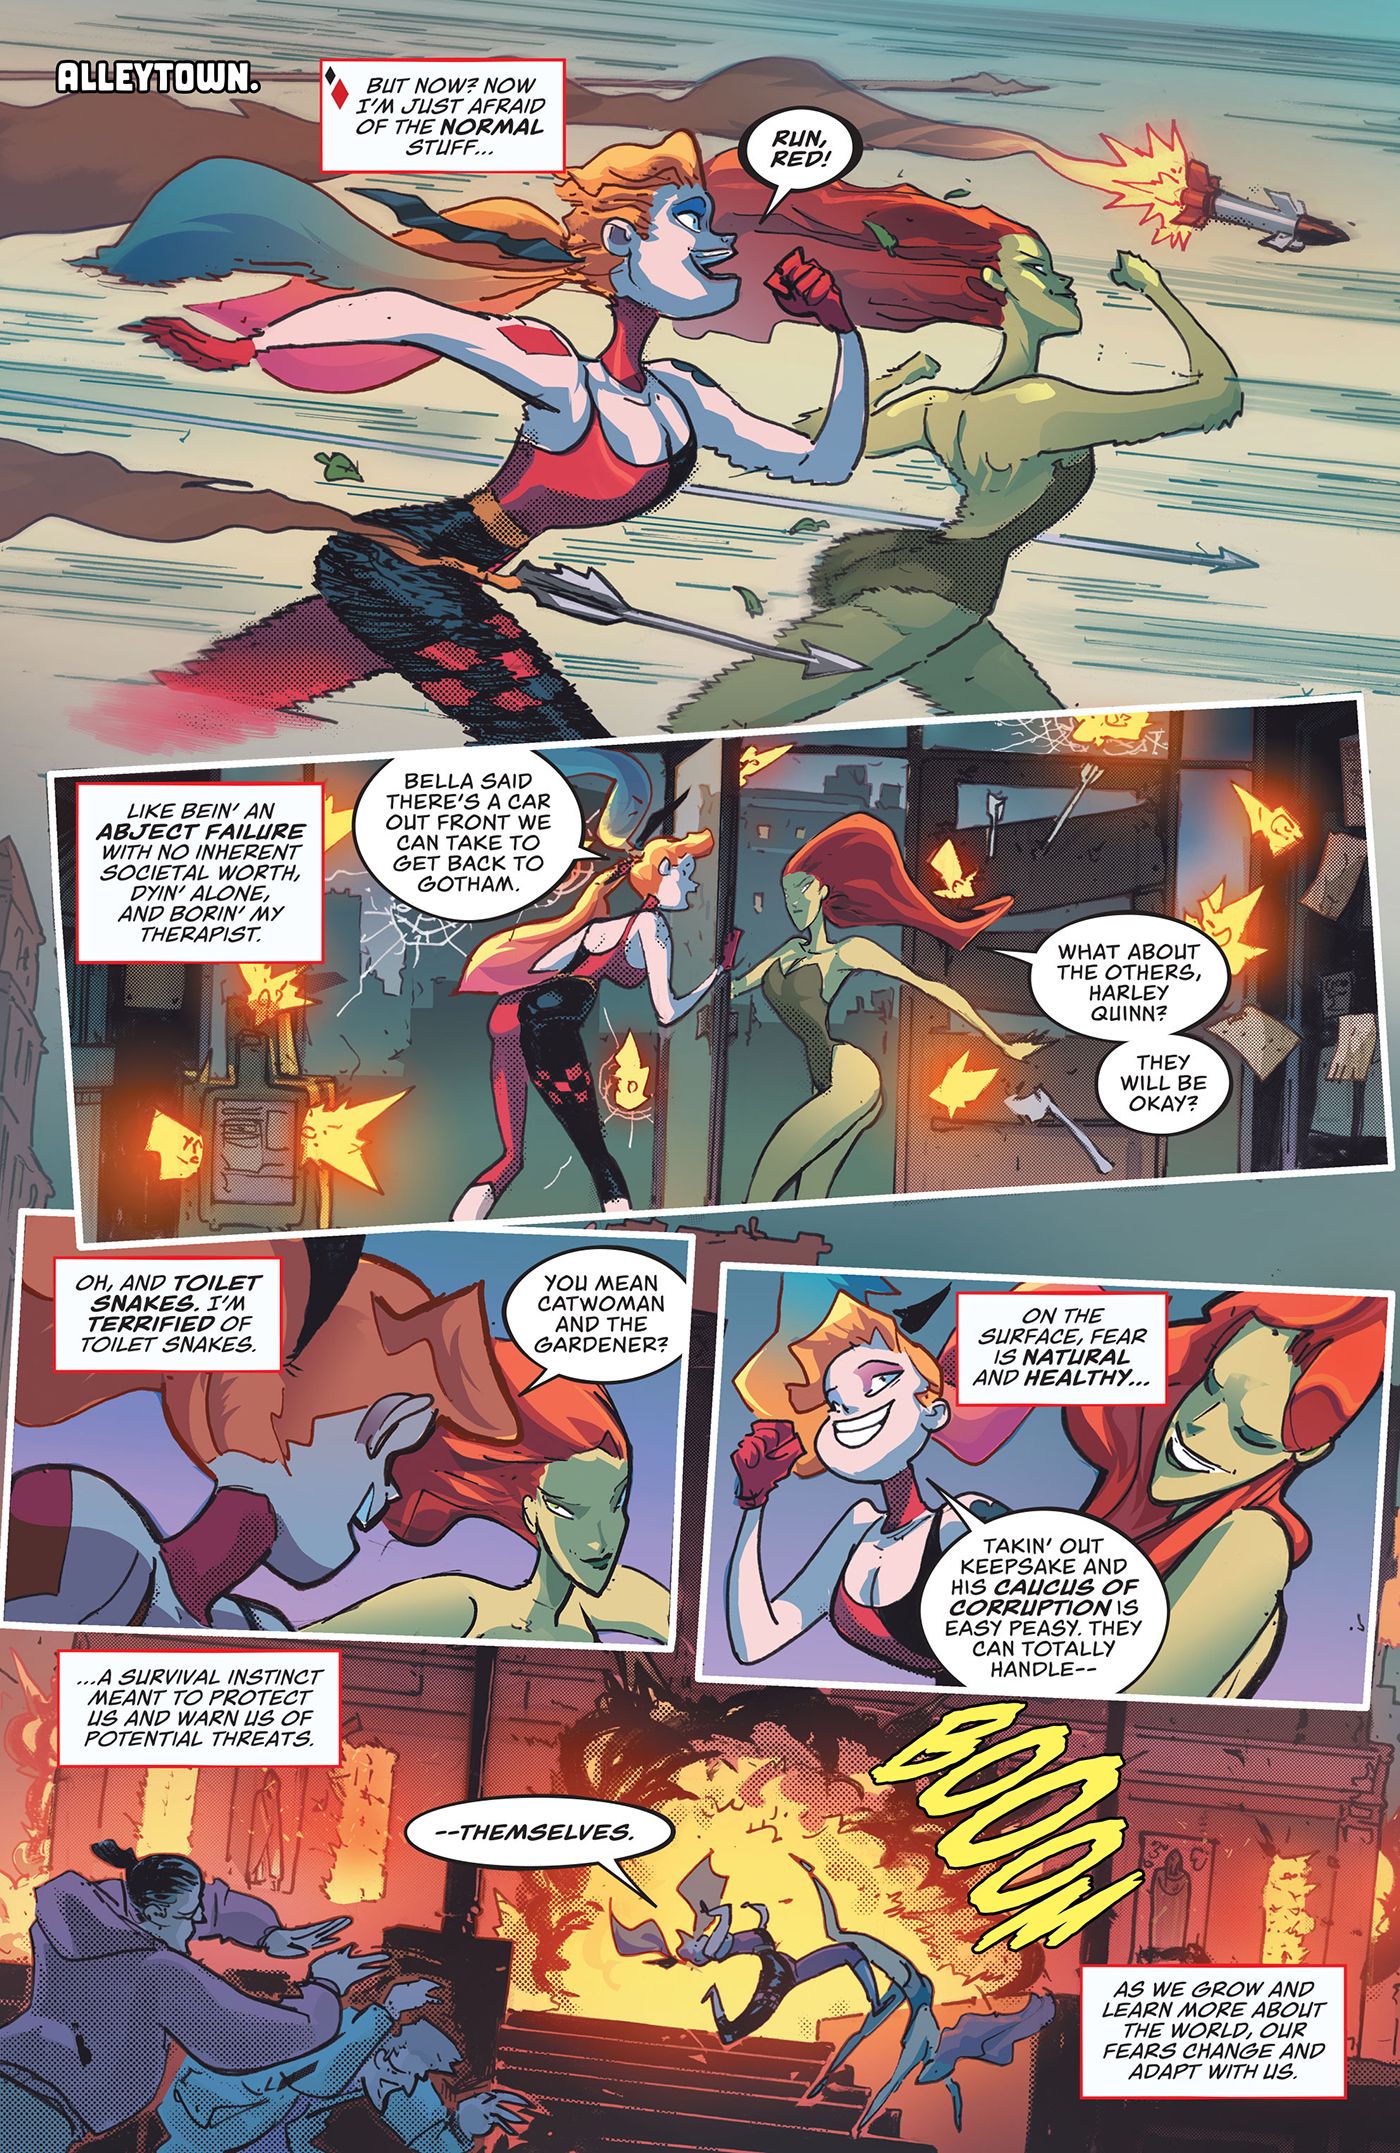 Harley Quinn and Poison Ivy run away from arrows, gunfire and rockets.